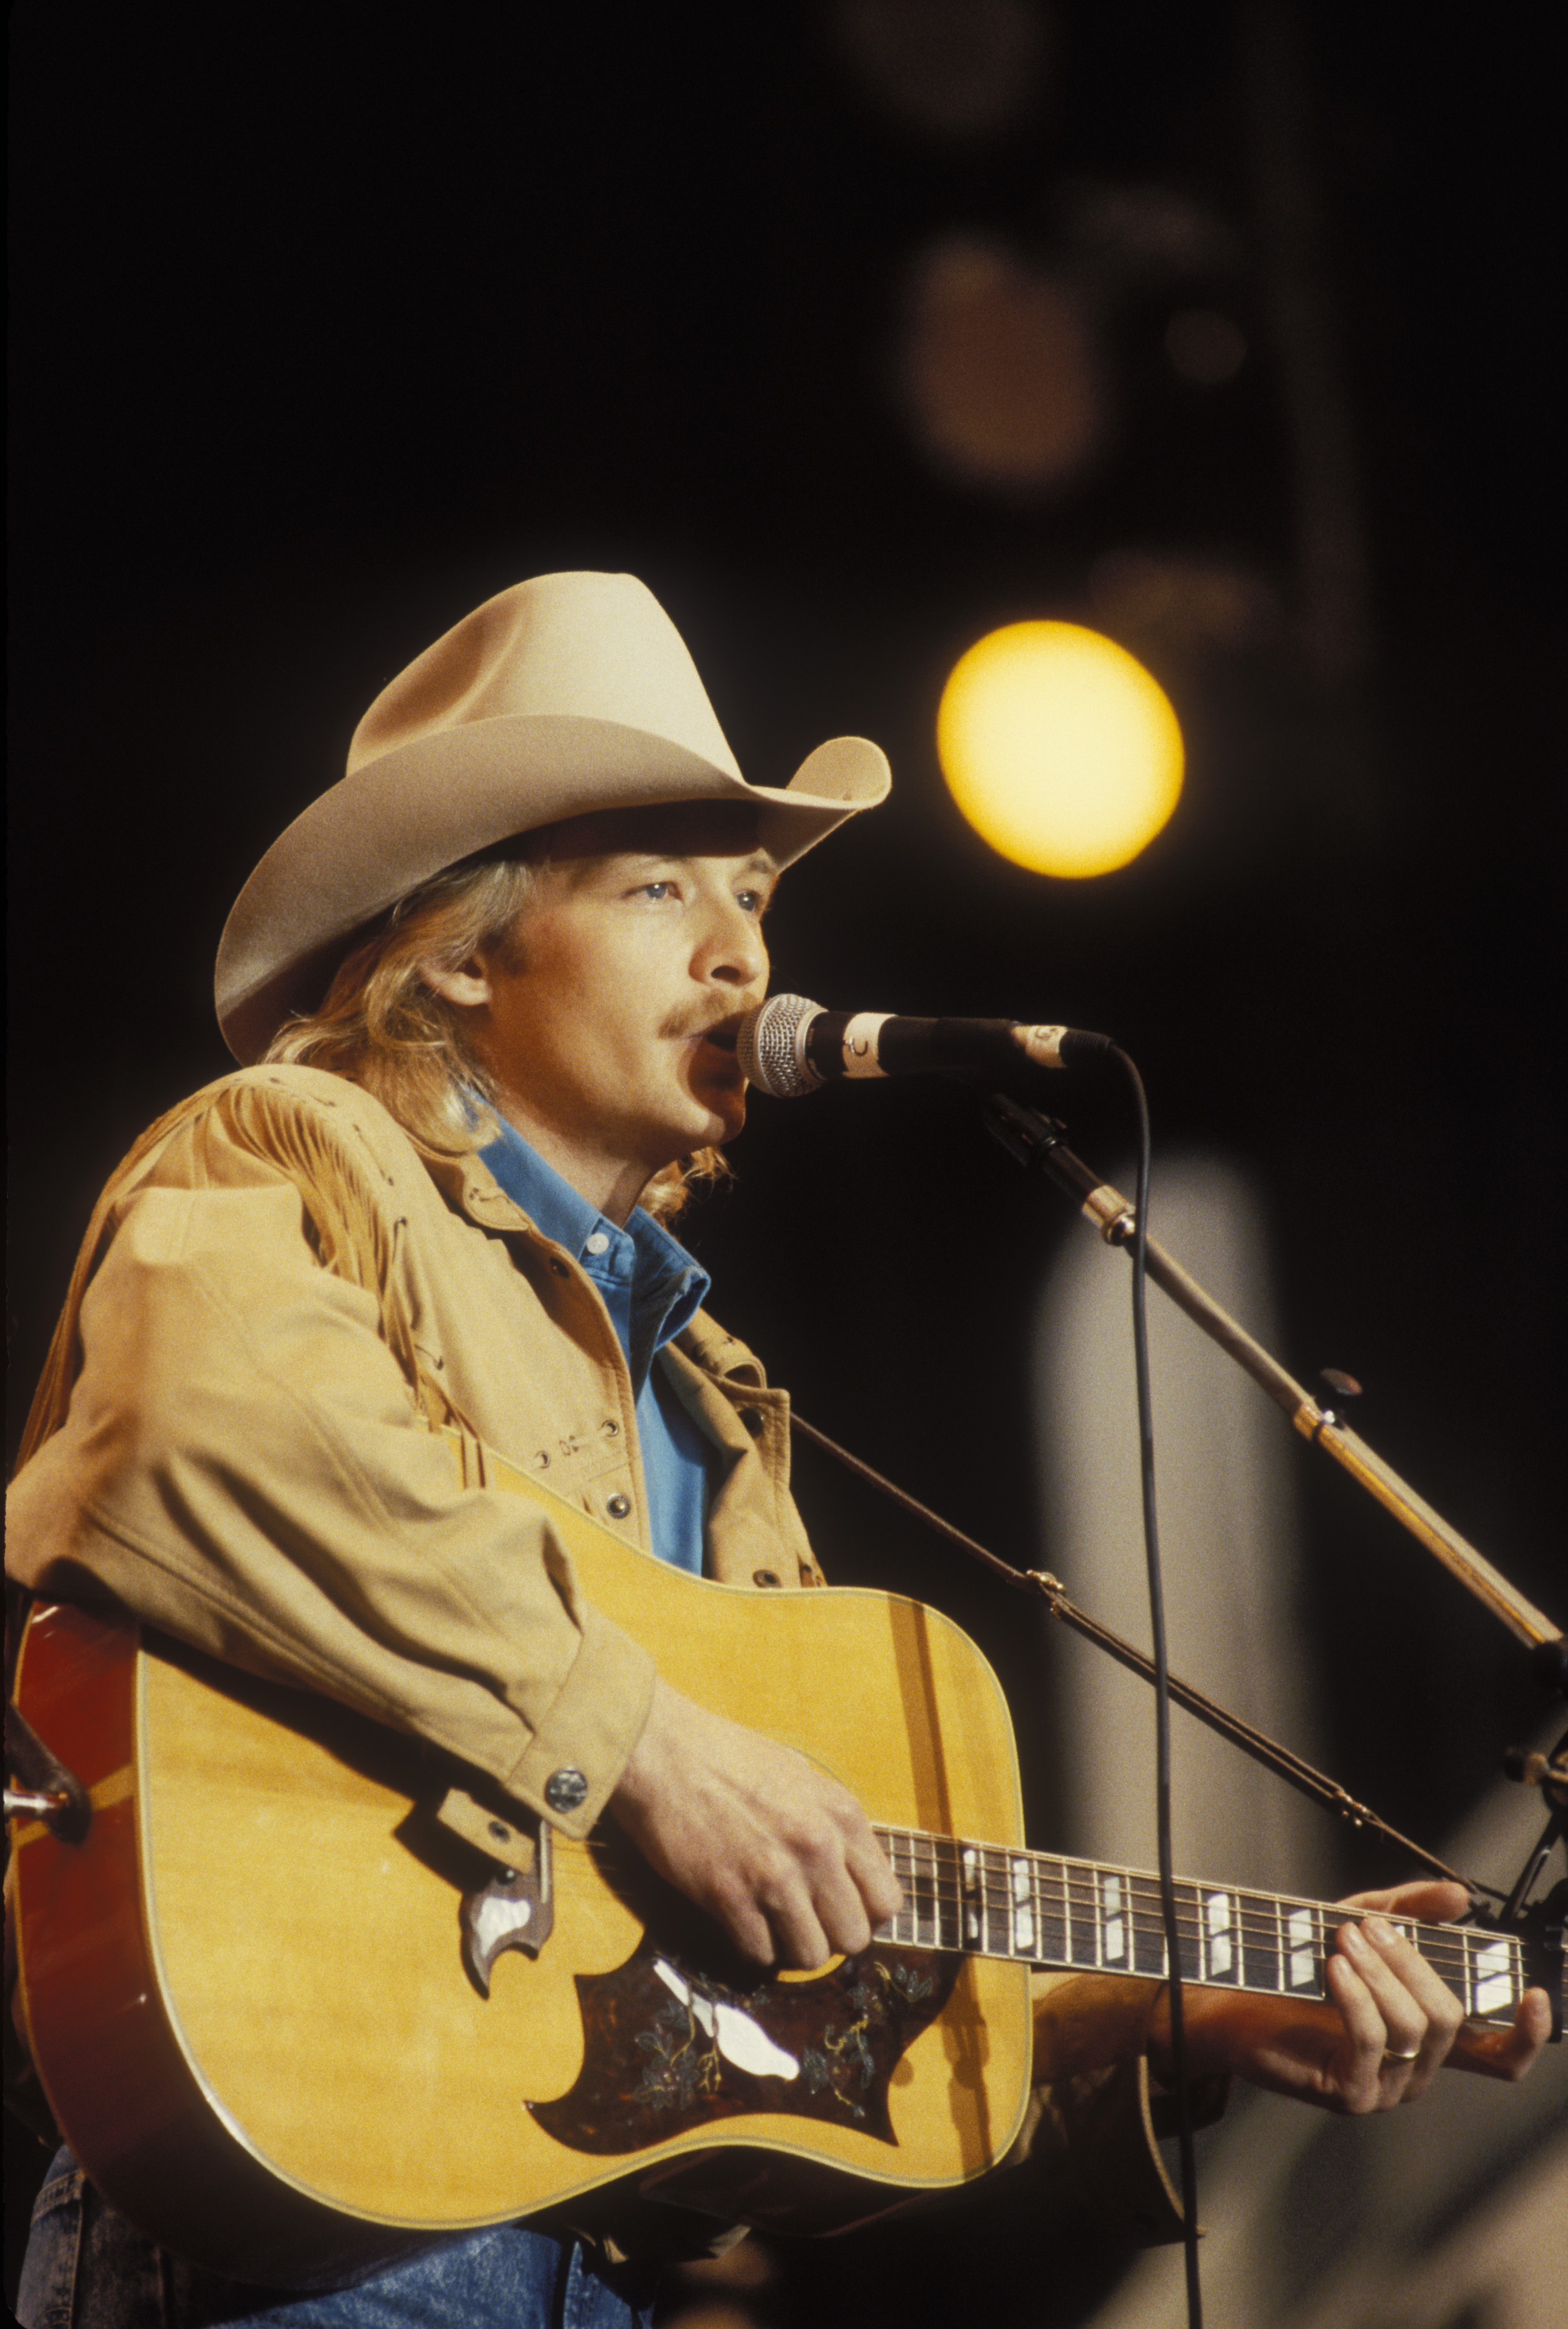 Alan Jackson performs at Farm Aid on April 7, 1990 in Indianapolis, Indiana | Source: Getty Images